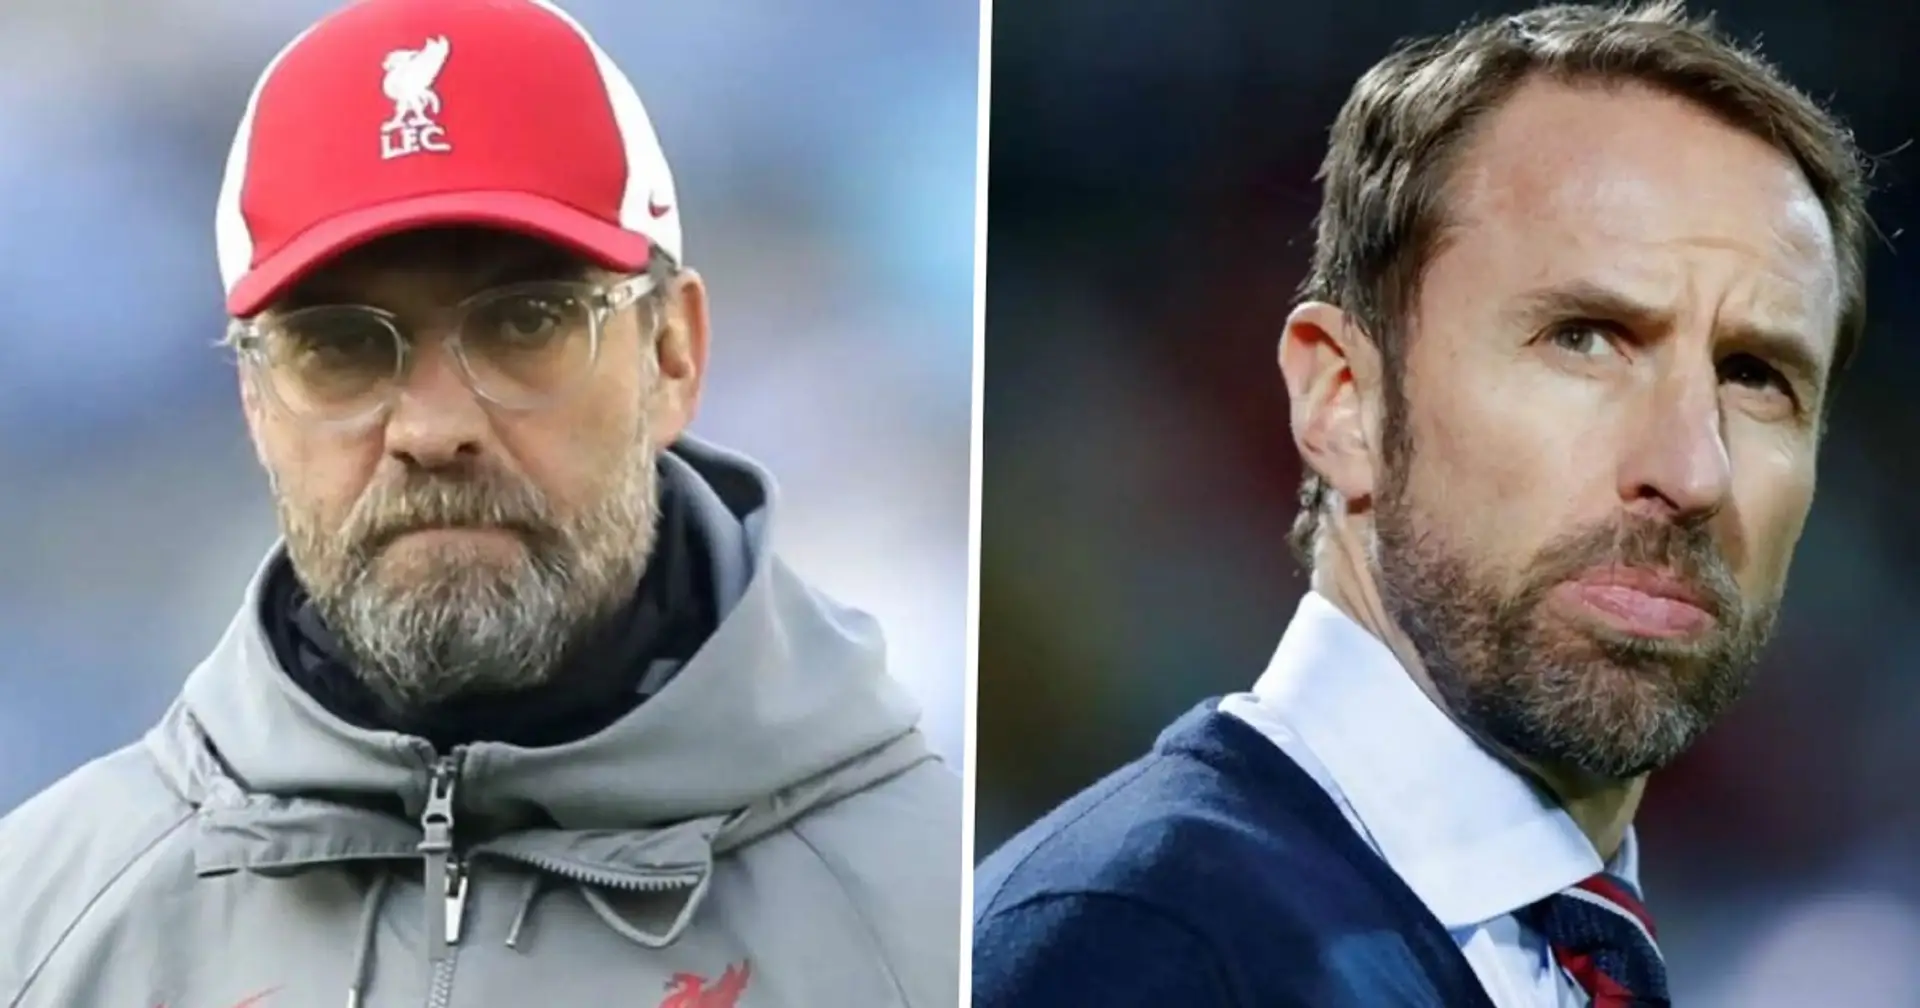 Southgate tipped to succeed Klopp & 2 more big Liverpool stories you might've missed